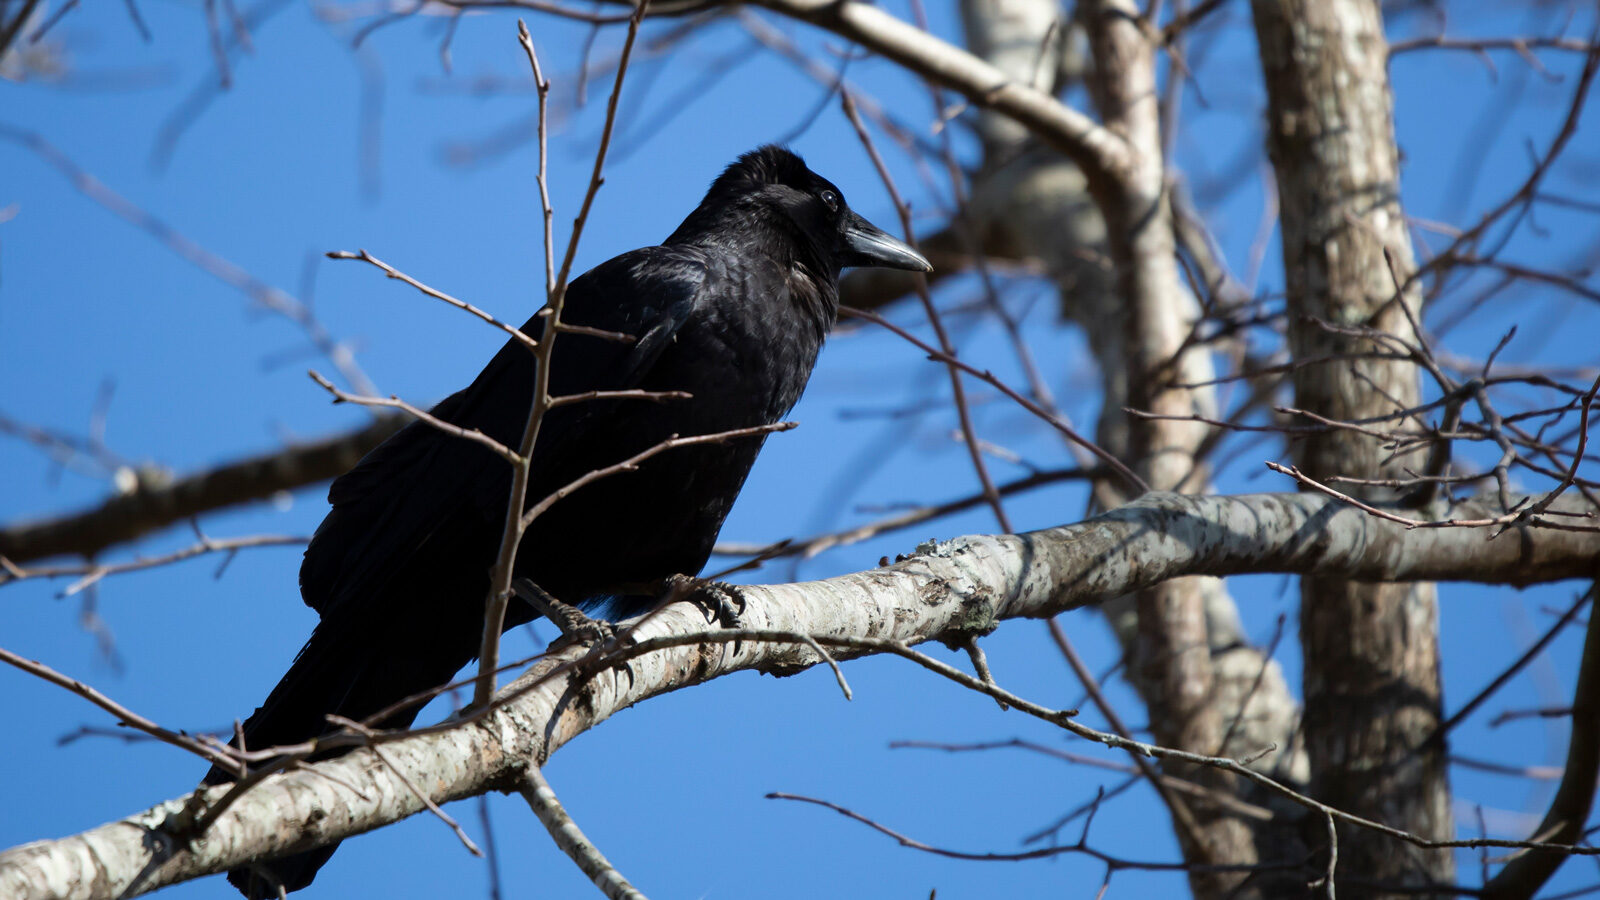 Fish crow perched on a branch